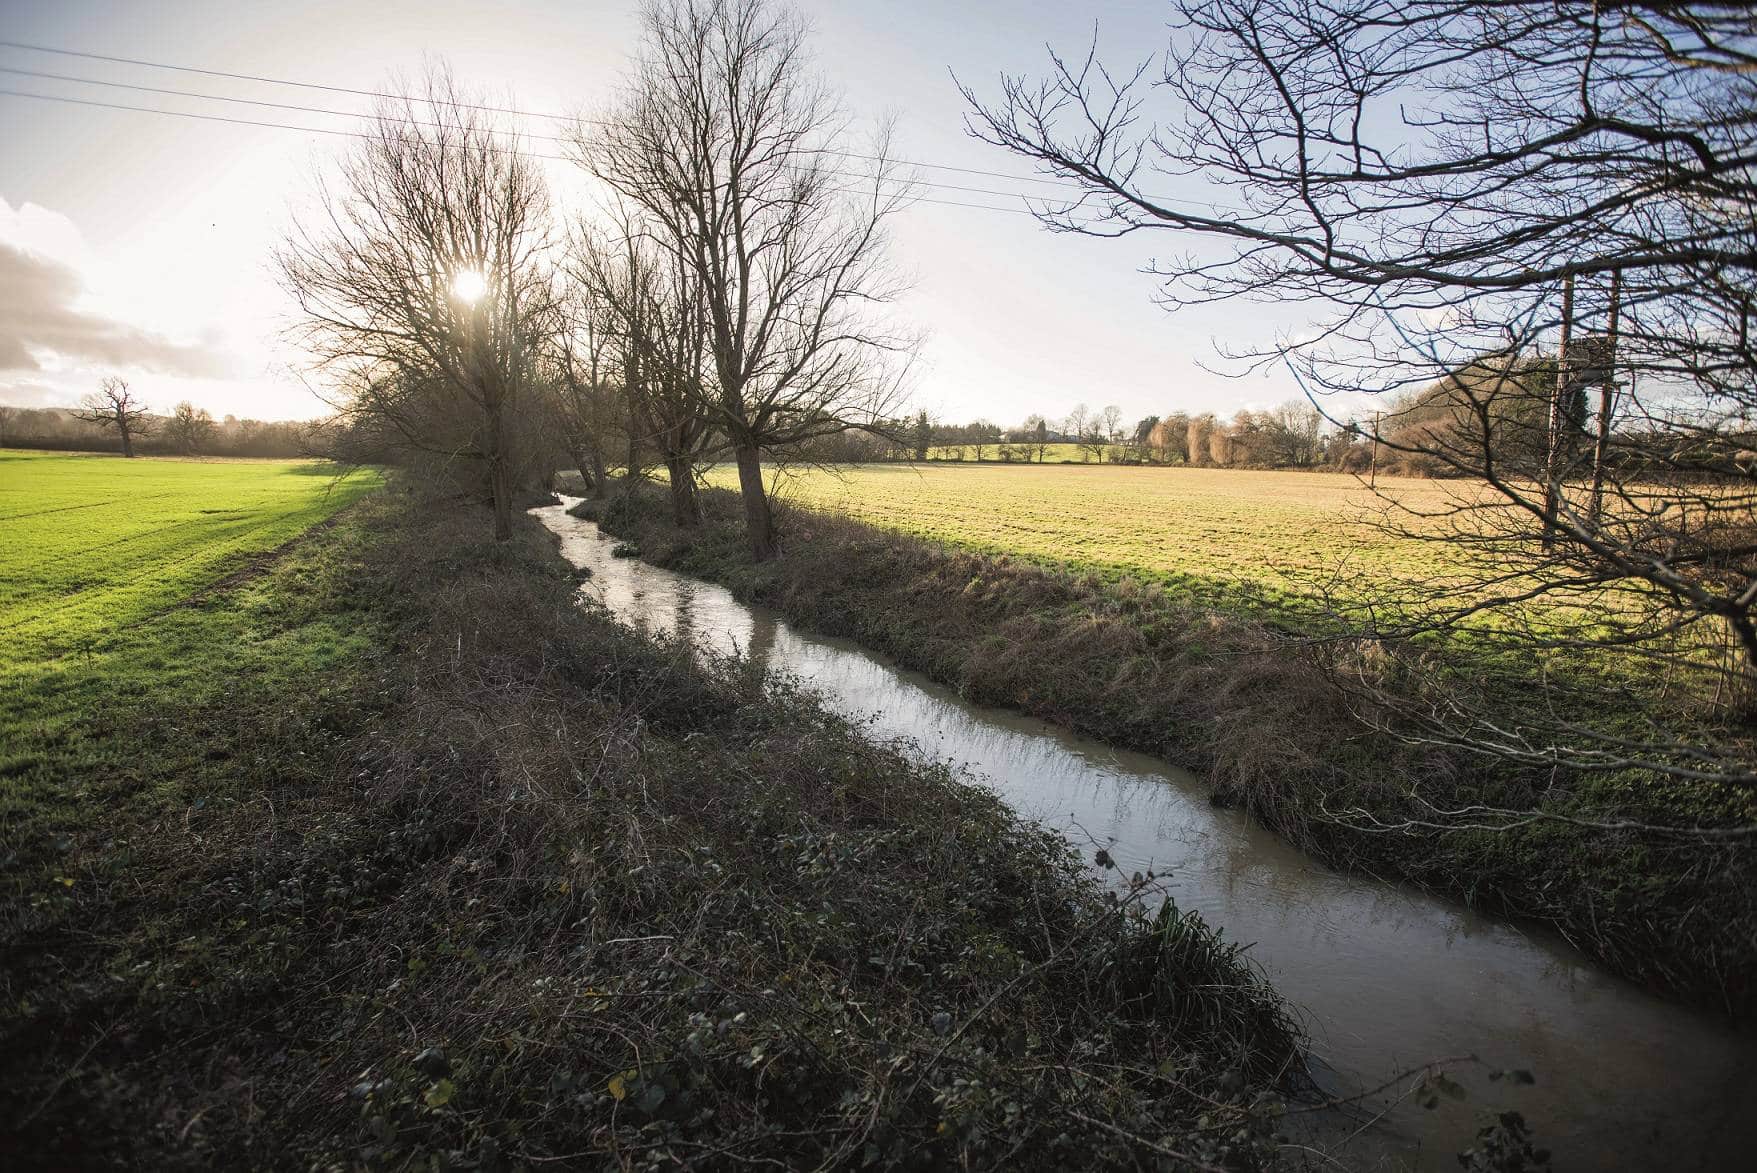 Somerhill Stream is one of the most polluted rivers in Britain